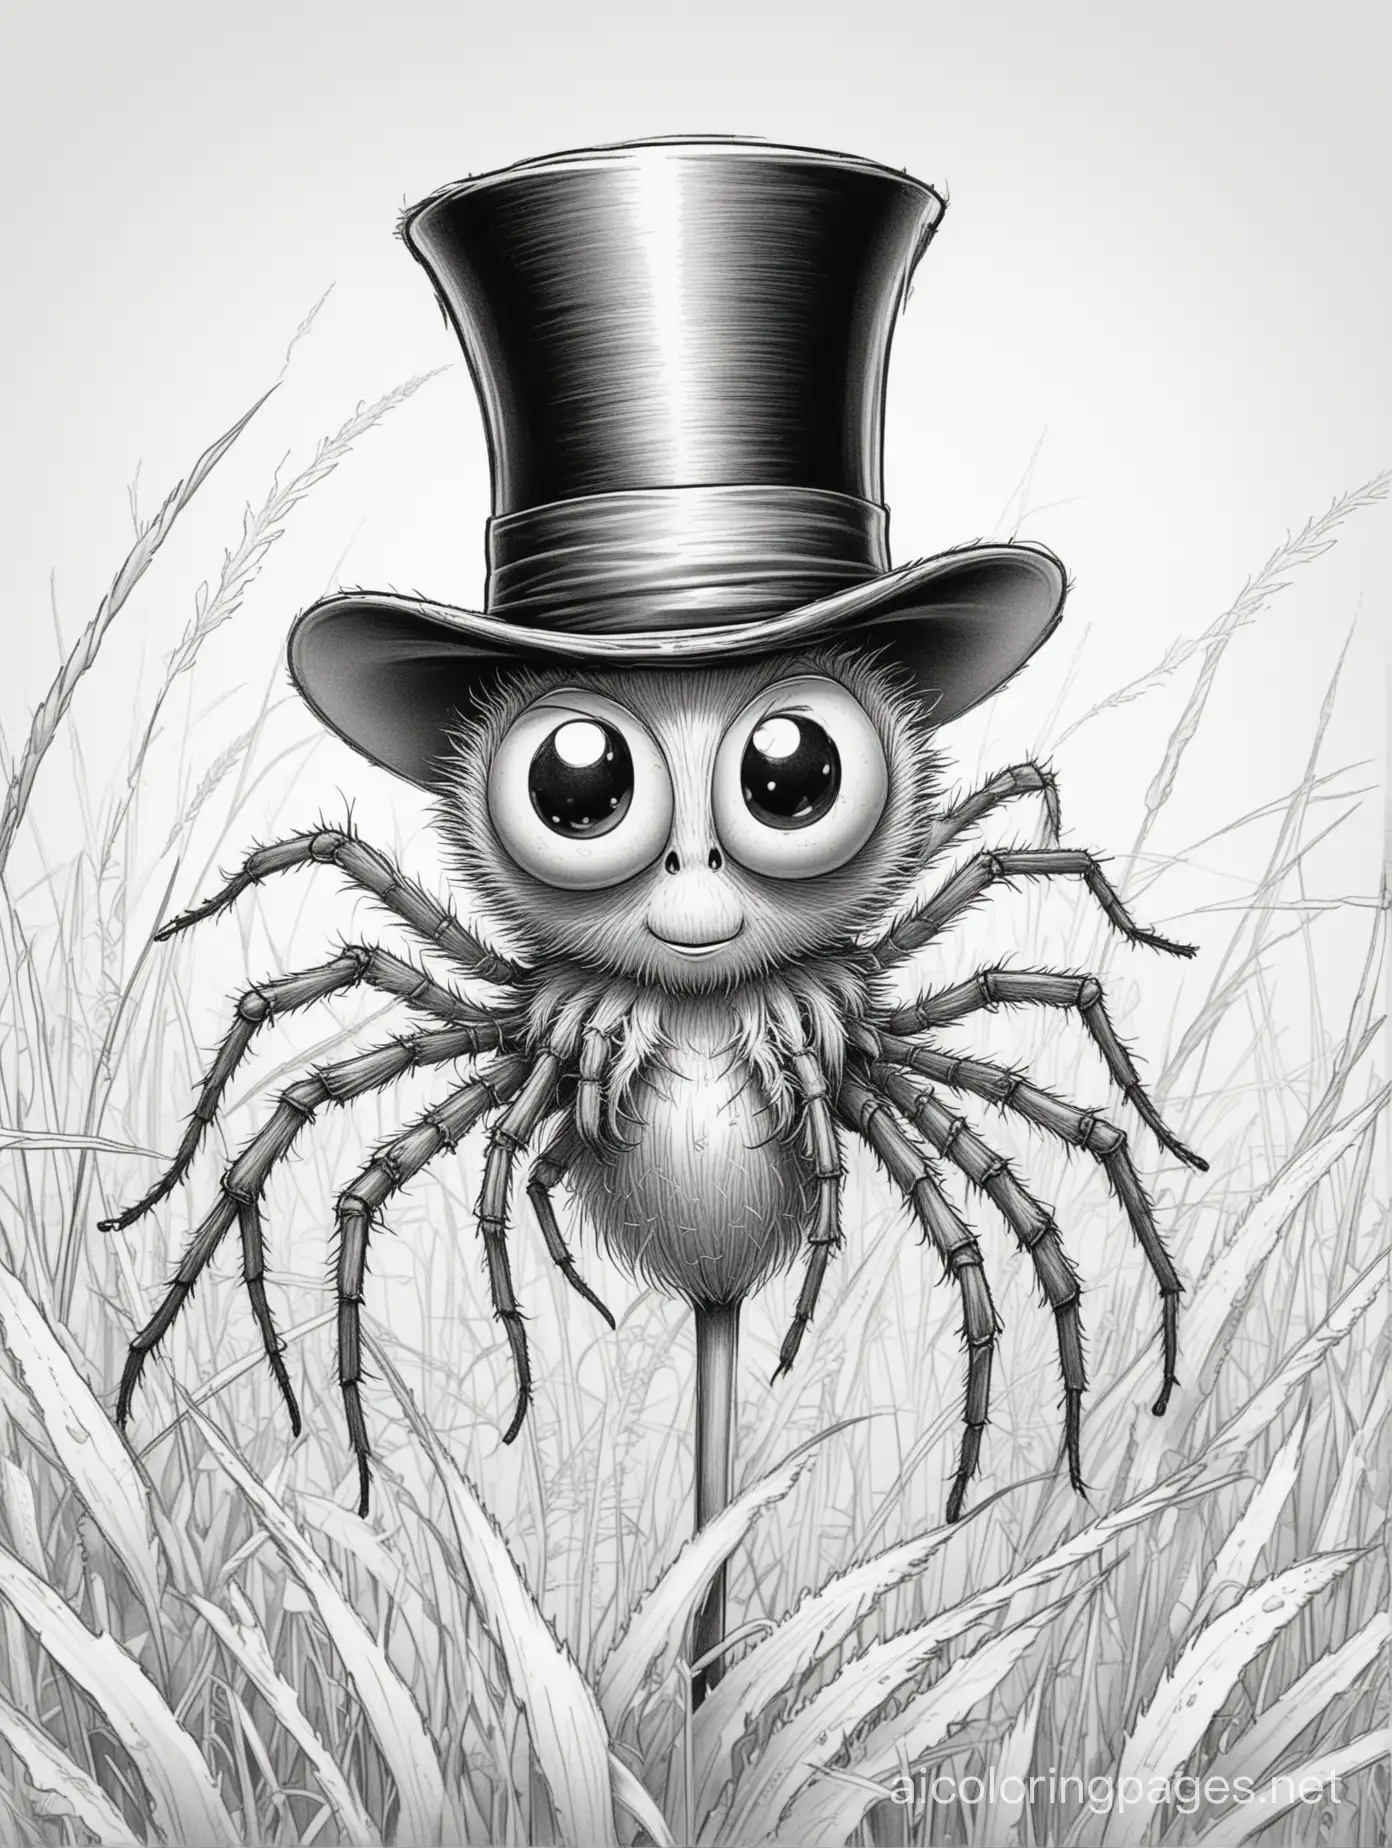 spider wearing a top hat and winking on a blade of grass, Coloring Page, black and white, line art, white background, Simplicity, Ample White Space. The background of the coloring page is plain white to make it easy for young children to color within the lines. The outlines of all the subjects are easy to distinguish, making it simple for kids to color without too much difficulty